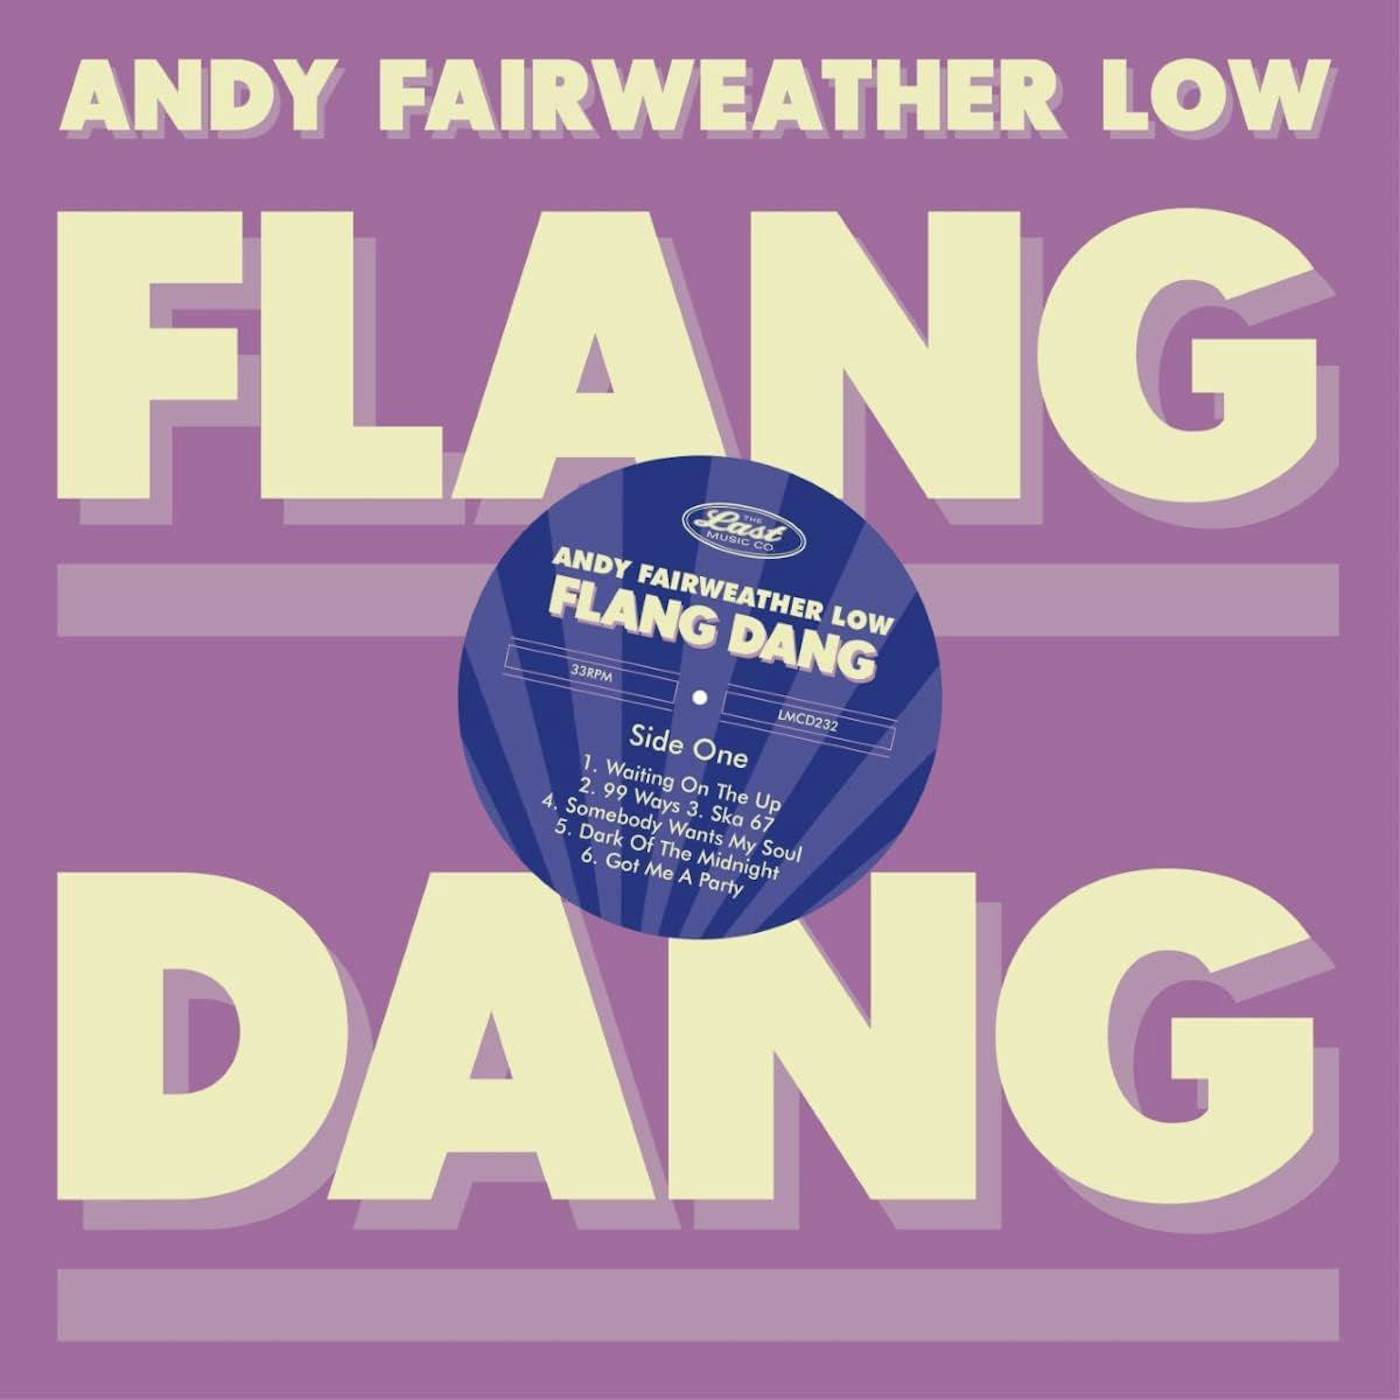 Andy Fairweather Low Flang Dang Vinyl Record